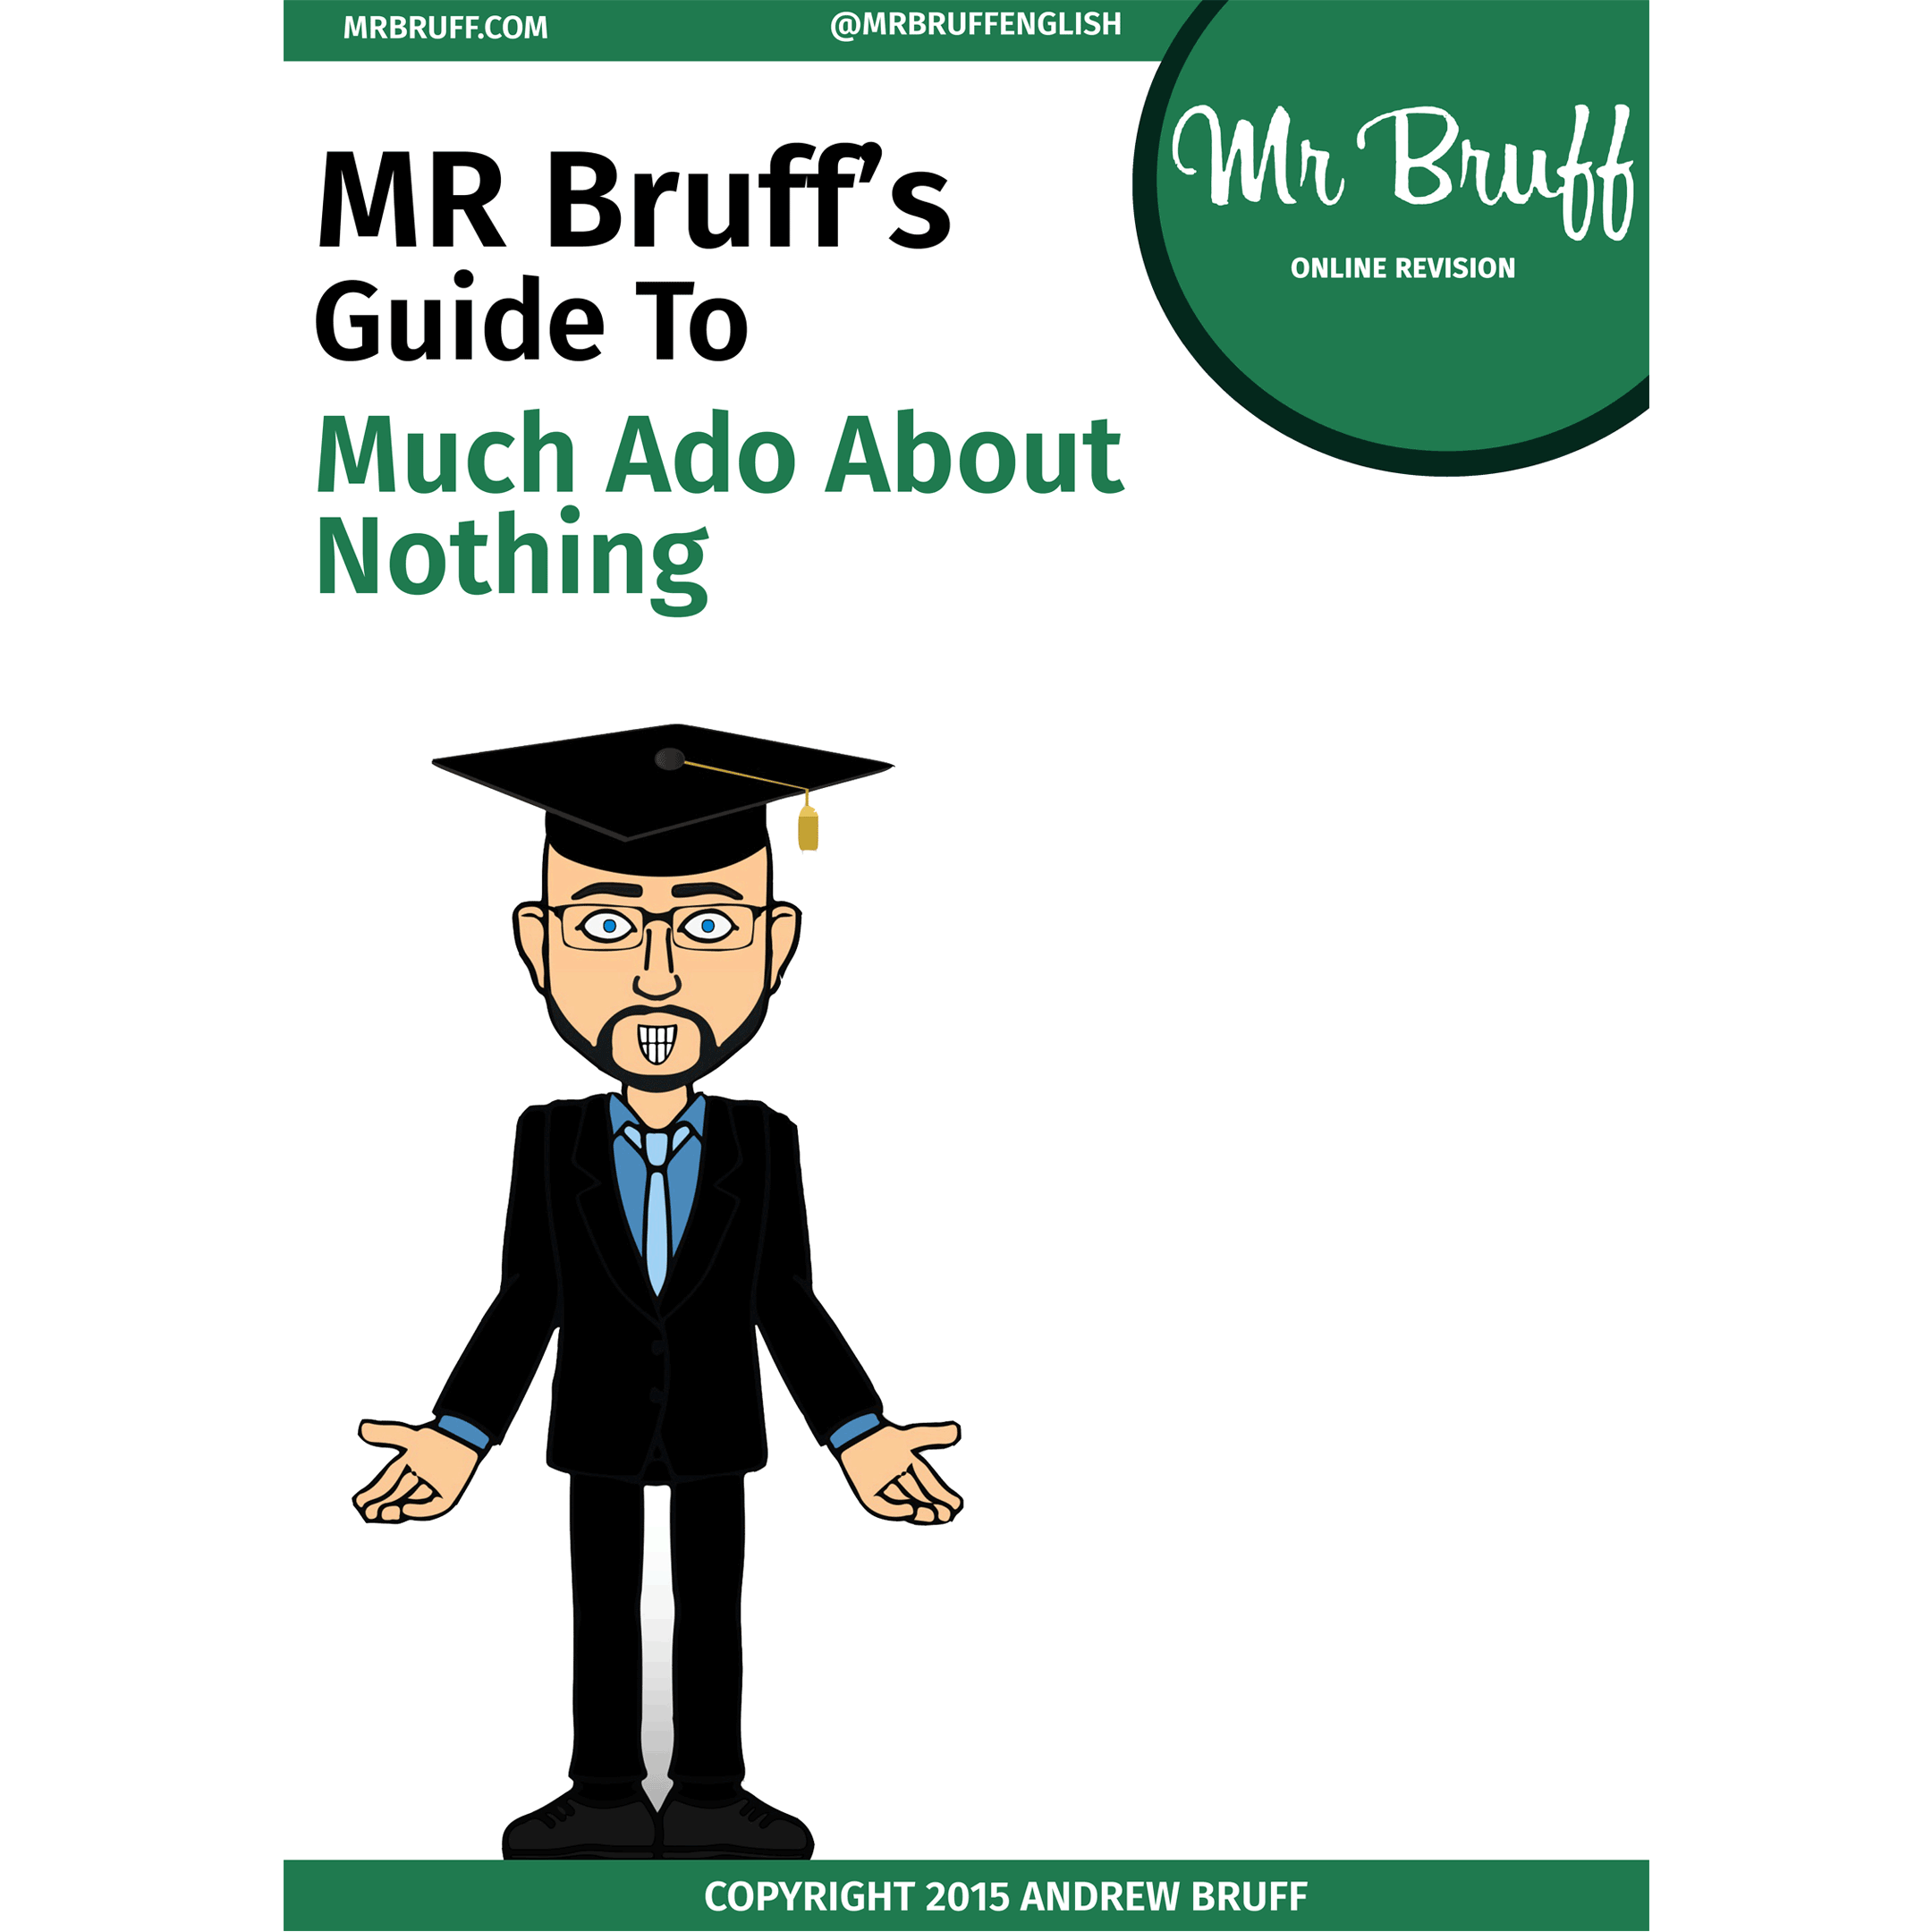 Ado　to　'Much　Nothing'　Mr　guide　Bruff's　Shakespeare's　About　eBook